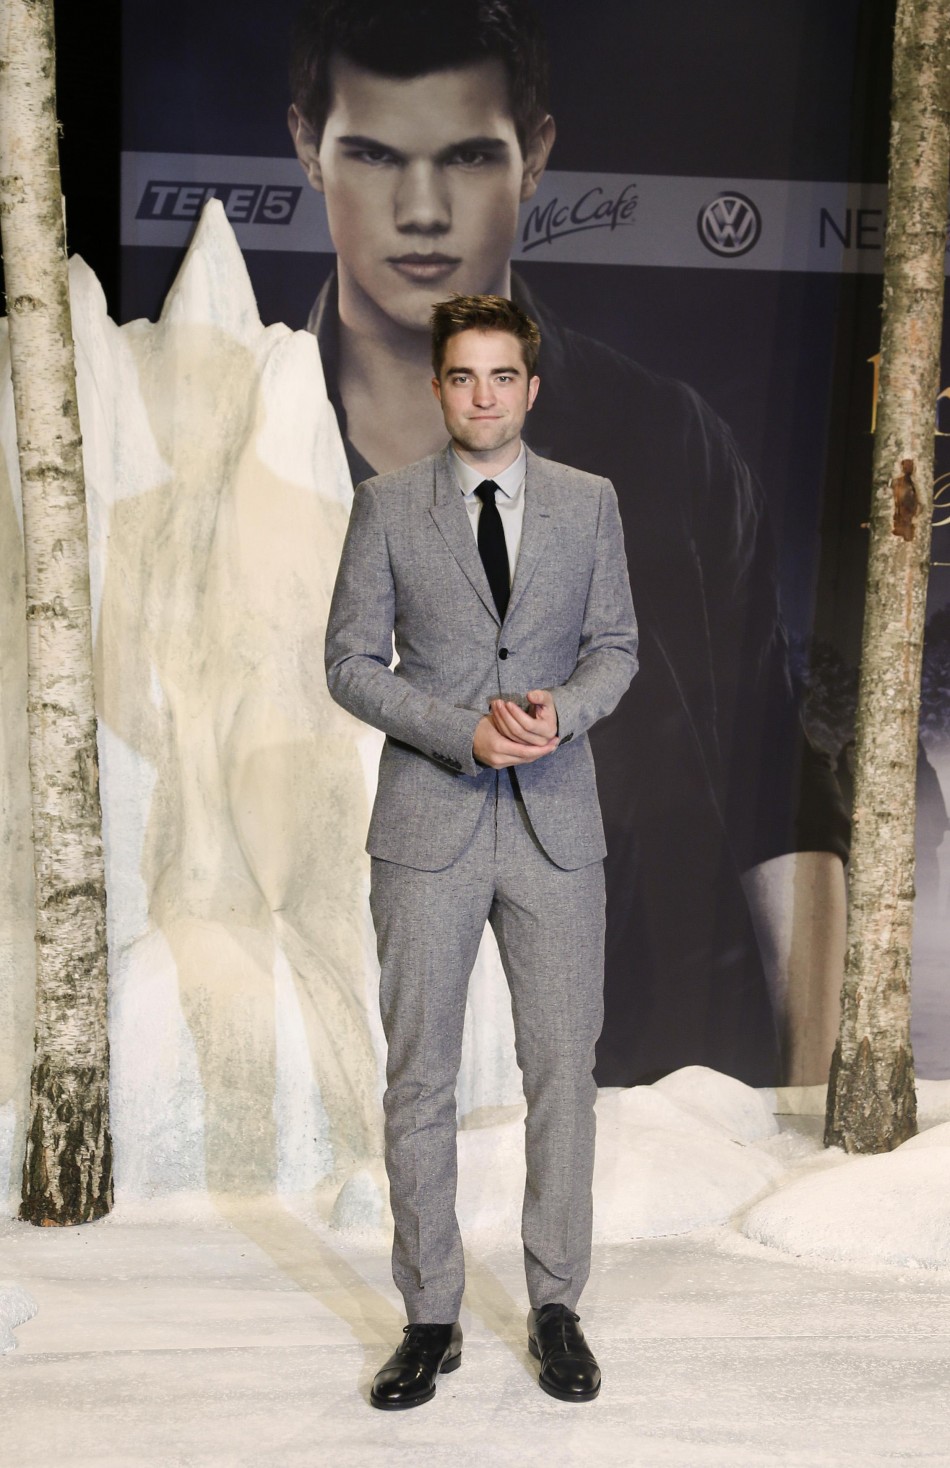 Pattinson poses for pictures before German premiere of The Twilight Saga Breaking Dawn Part 2 in Berlin